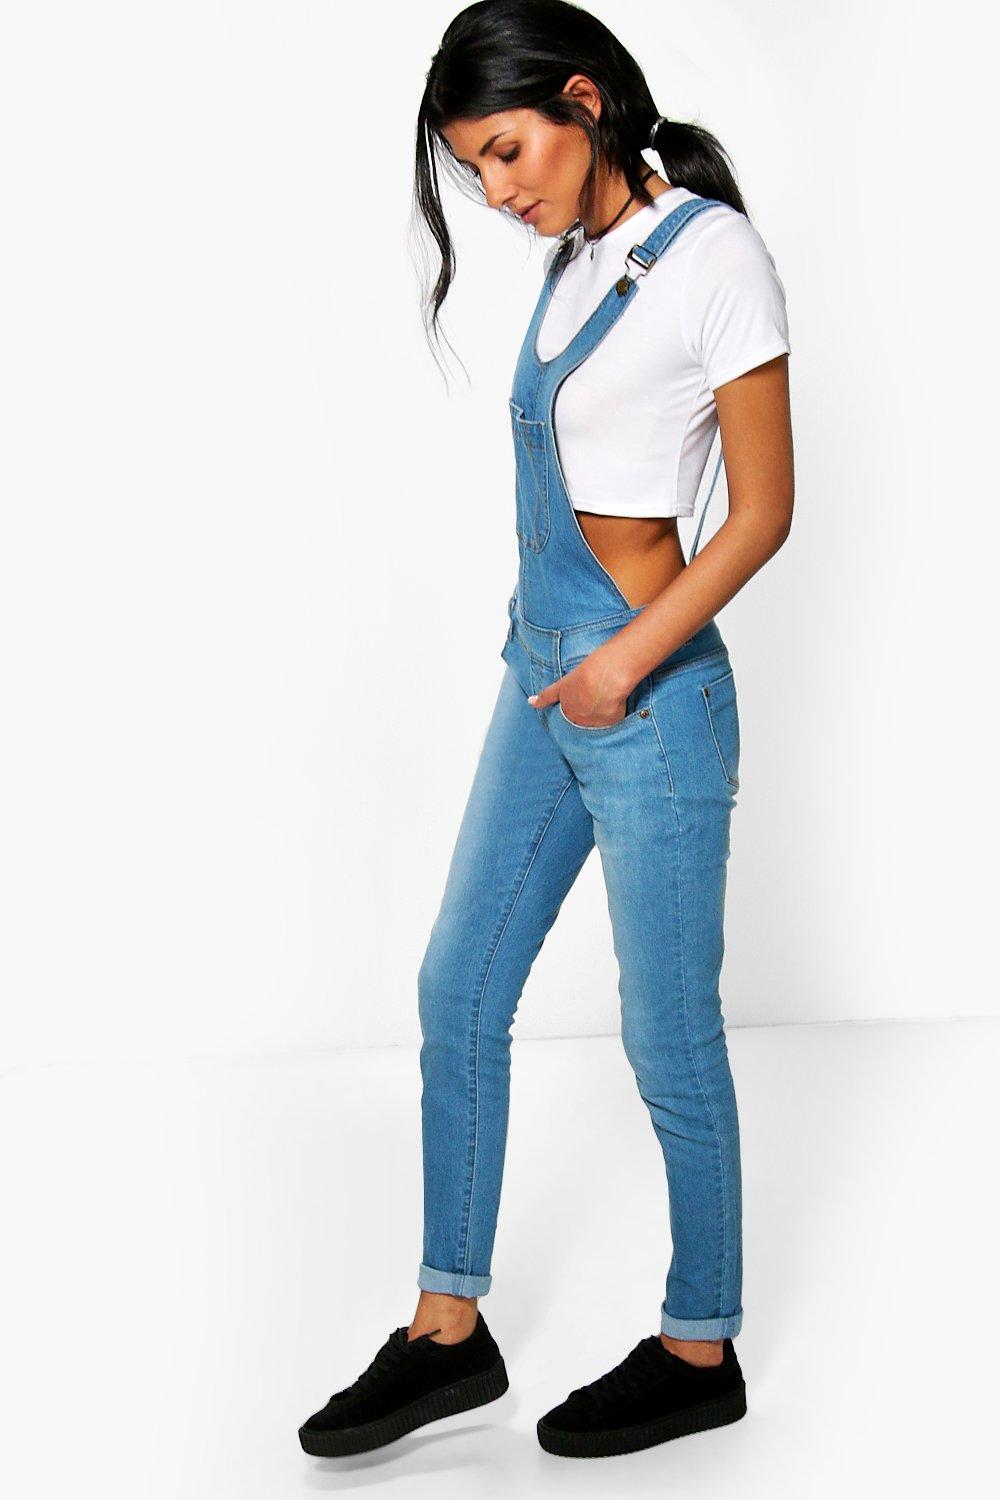 Boohoo Womens Willow Blue Super Skinny Dungarees in Blue size 14 | eBay